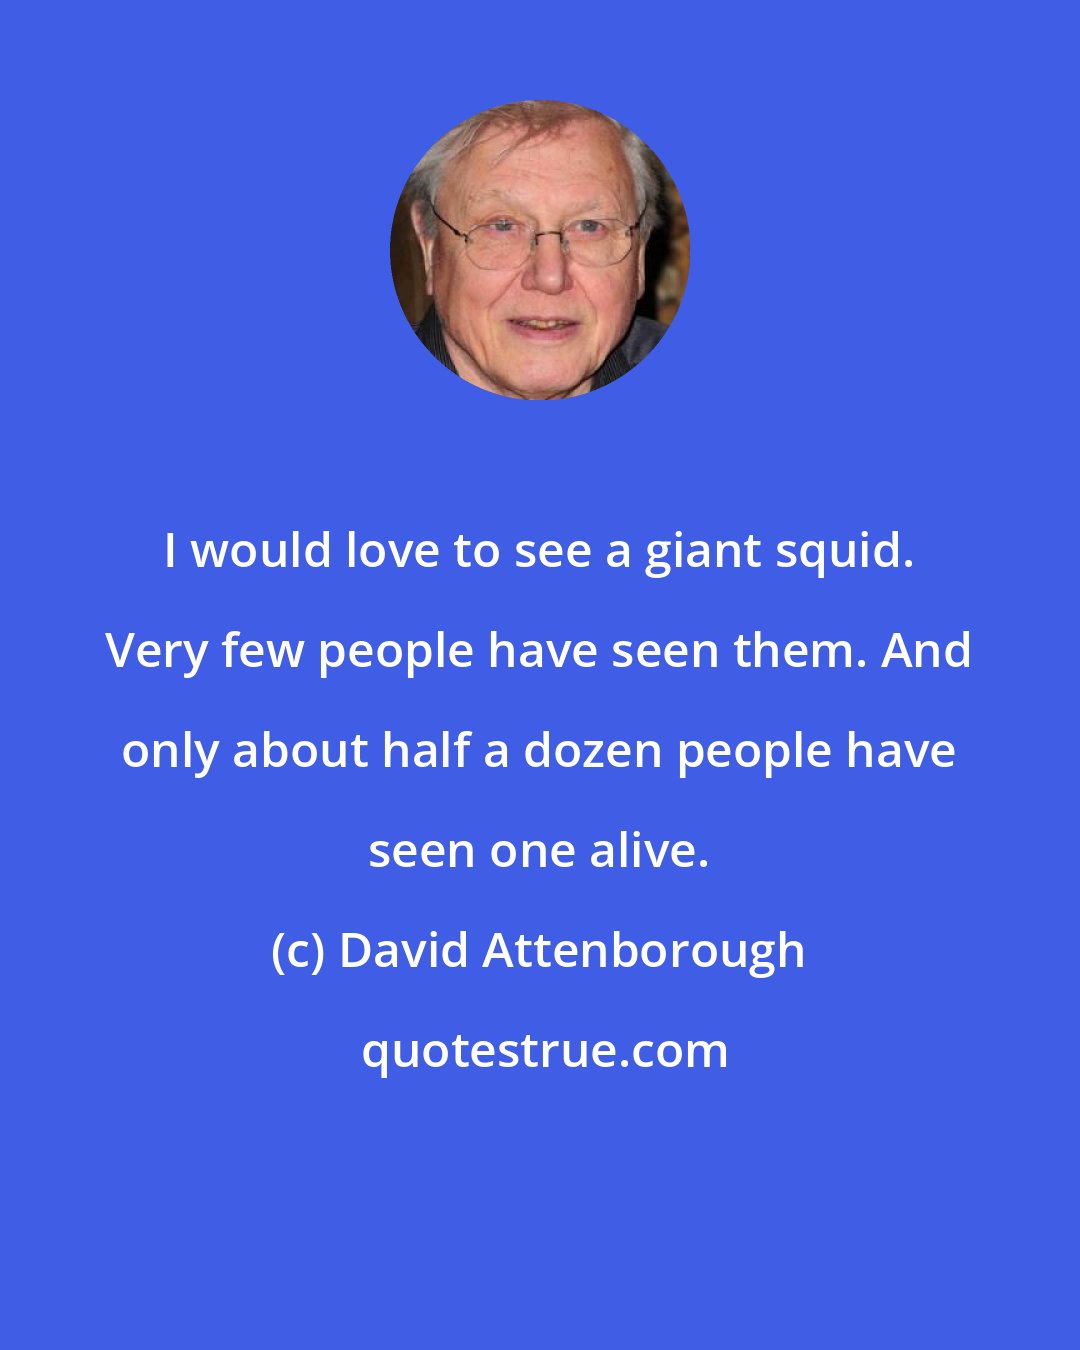 David Attenborough: I would love to see a giant squid. Very few people have seen them. And only about half a dozen people have seen one alive.